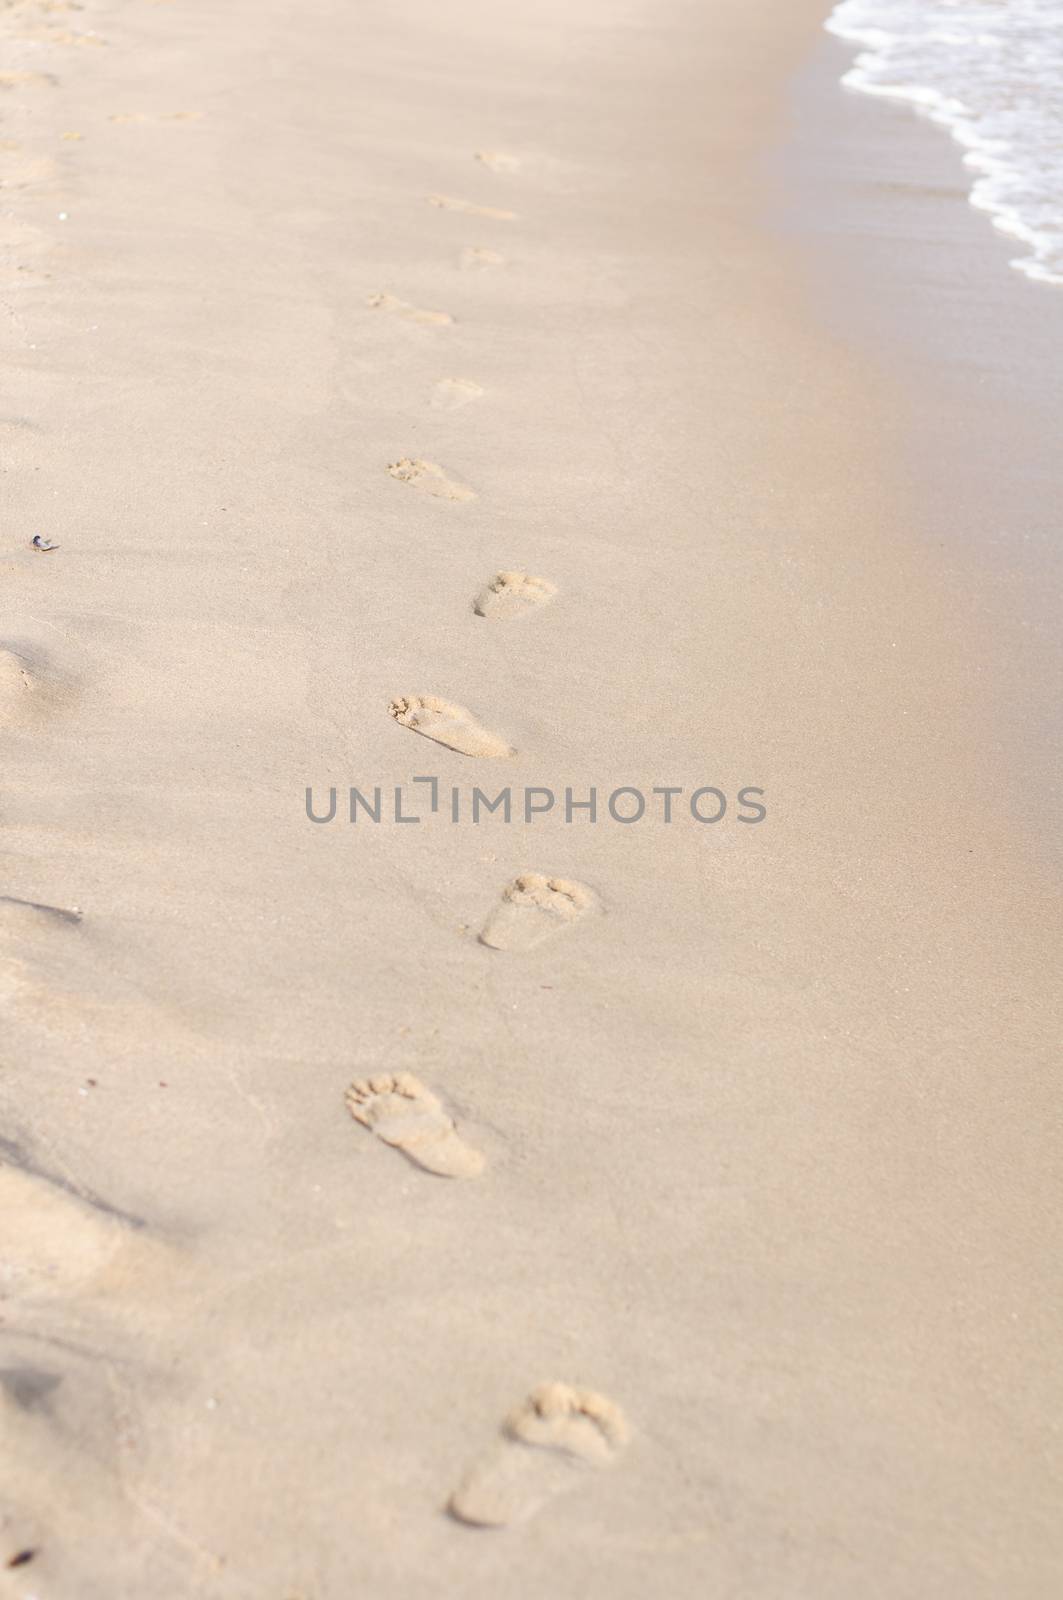 Footprints in wet sand of the beach